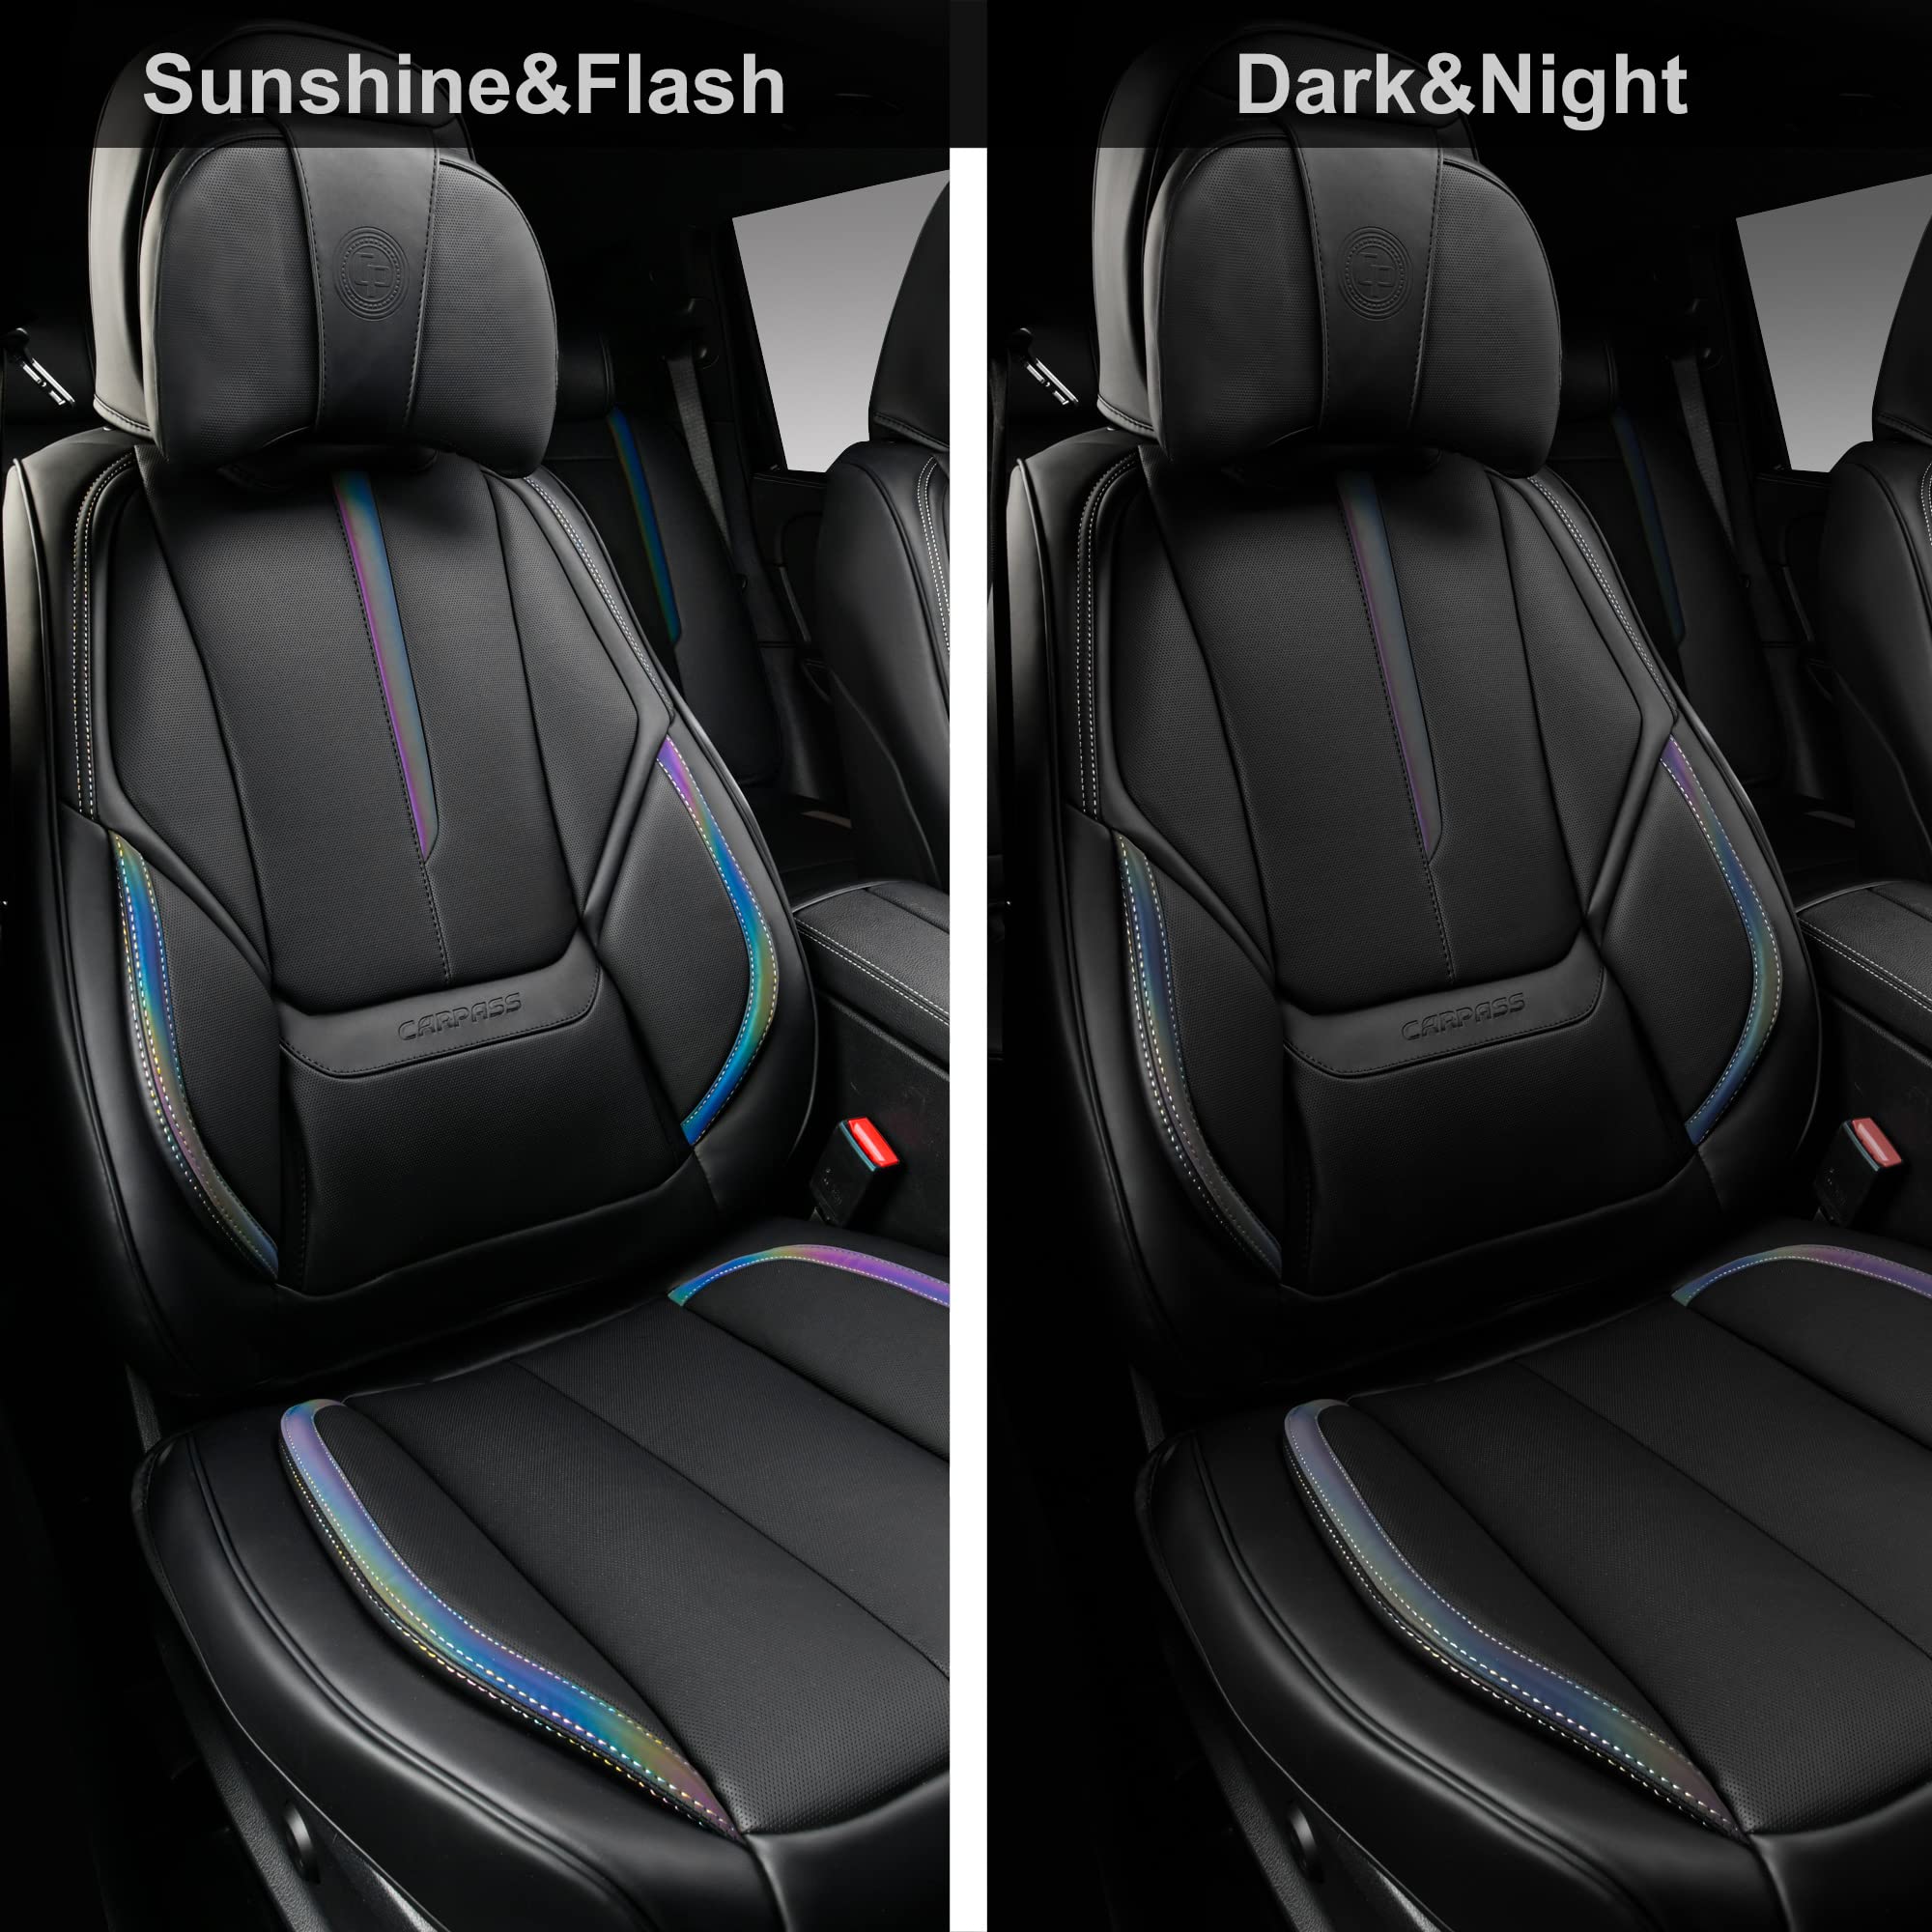 Chameleon Lumbar Support Nappa Leather Seat Covers Full Set Coverage Waterproof & Breathable Luxury Cushioned